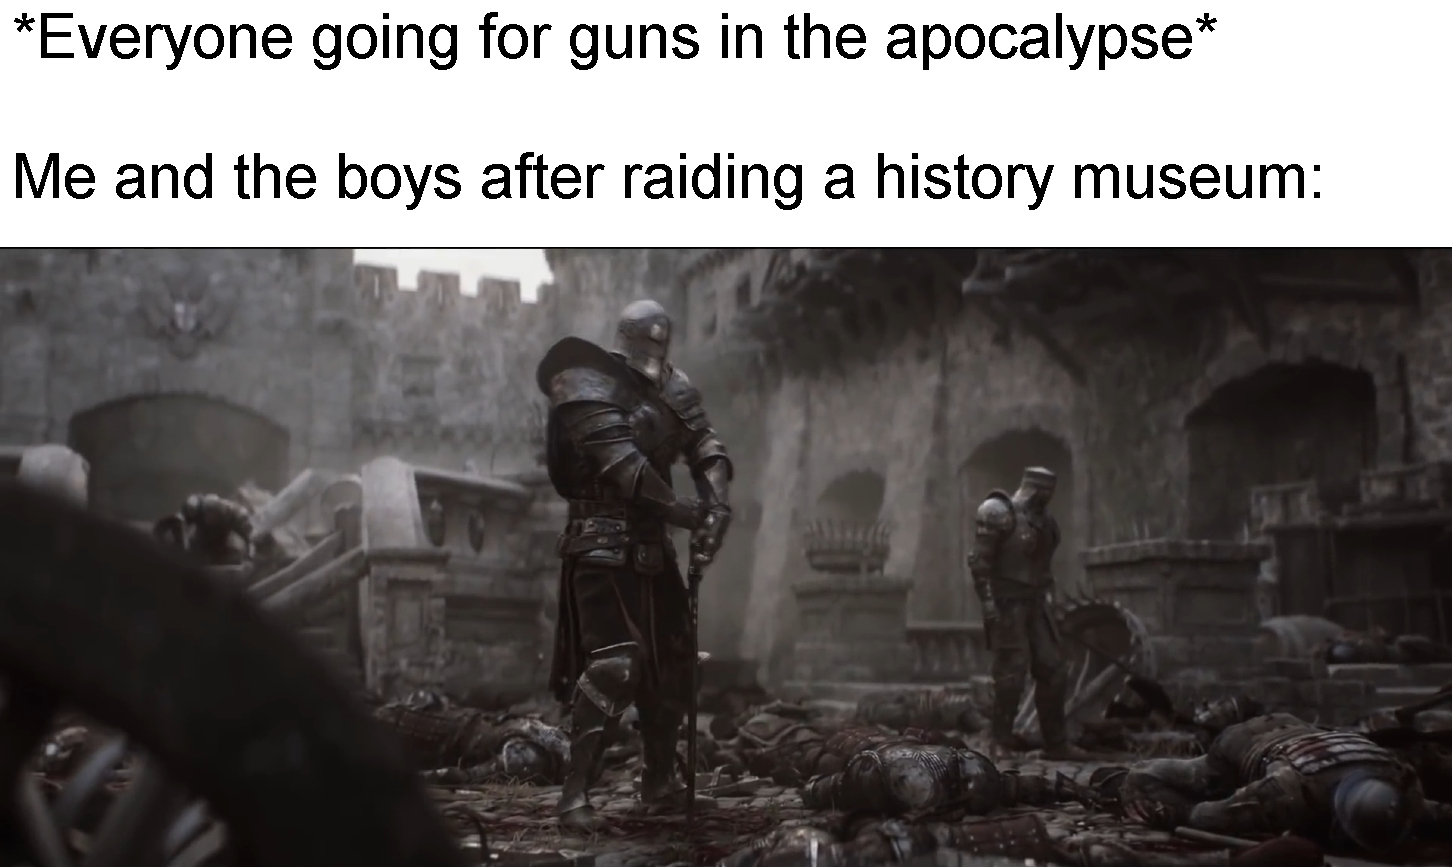 dank memes  - Everyone going for guns in the apocalypse Me and the boys after raiding a history museum